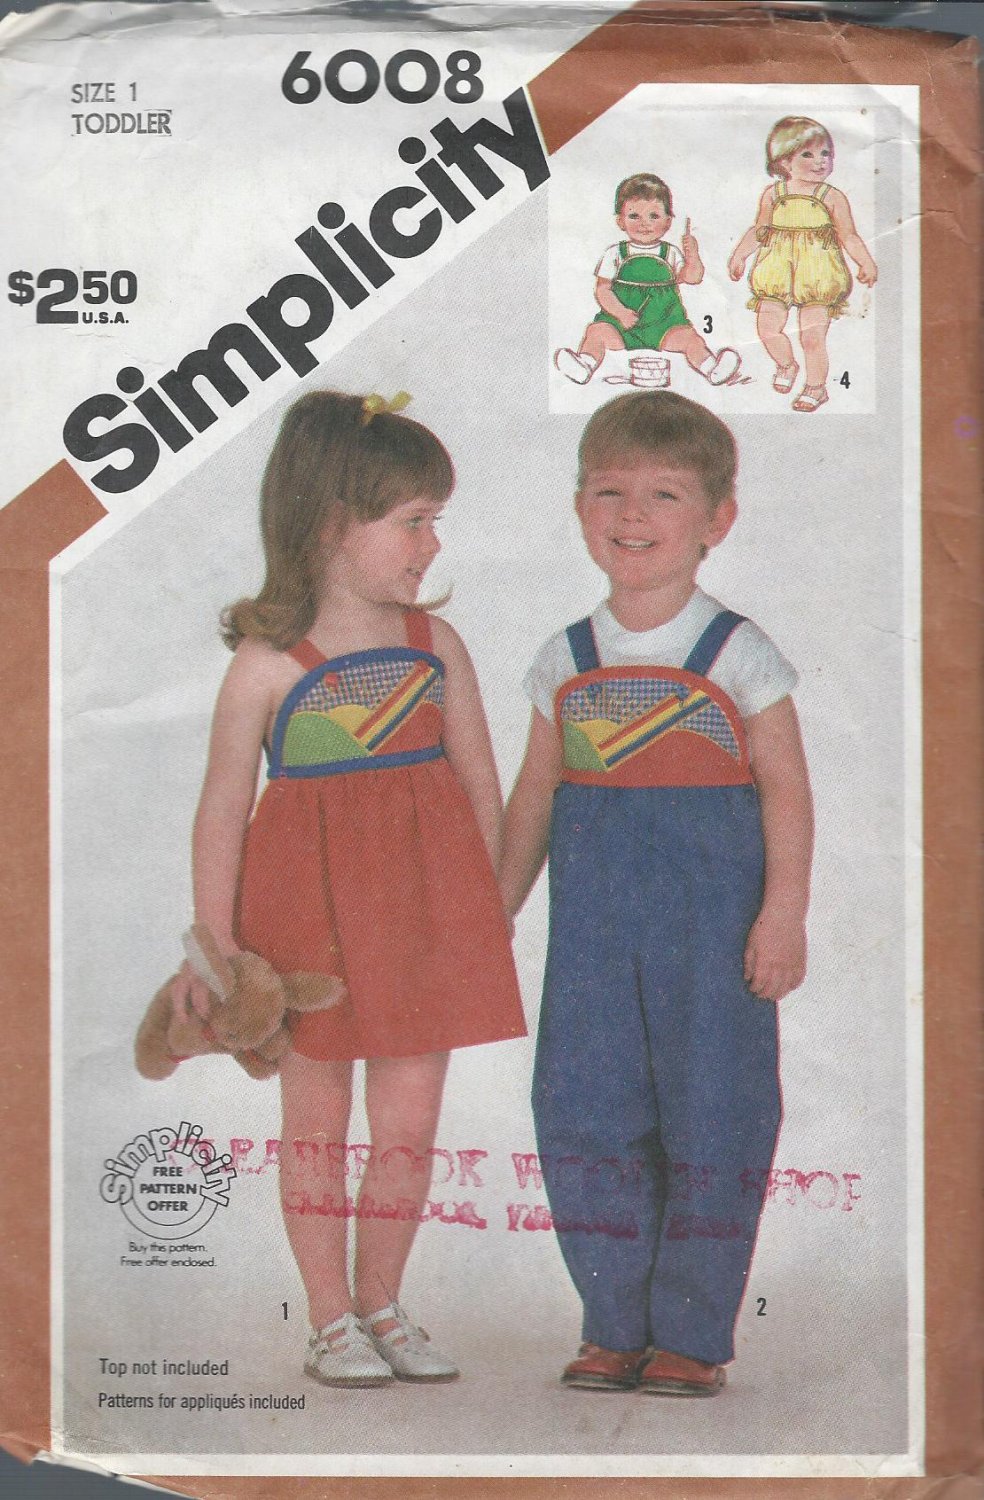 Vintage Simplicity Pattern 6008 Boys and Girls! Toddler Size 1